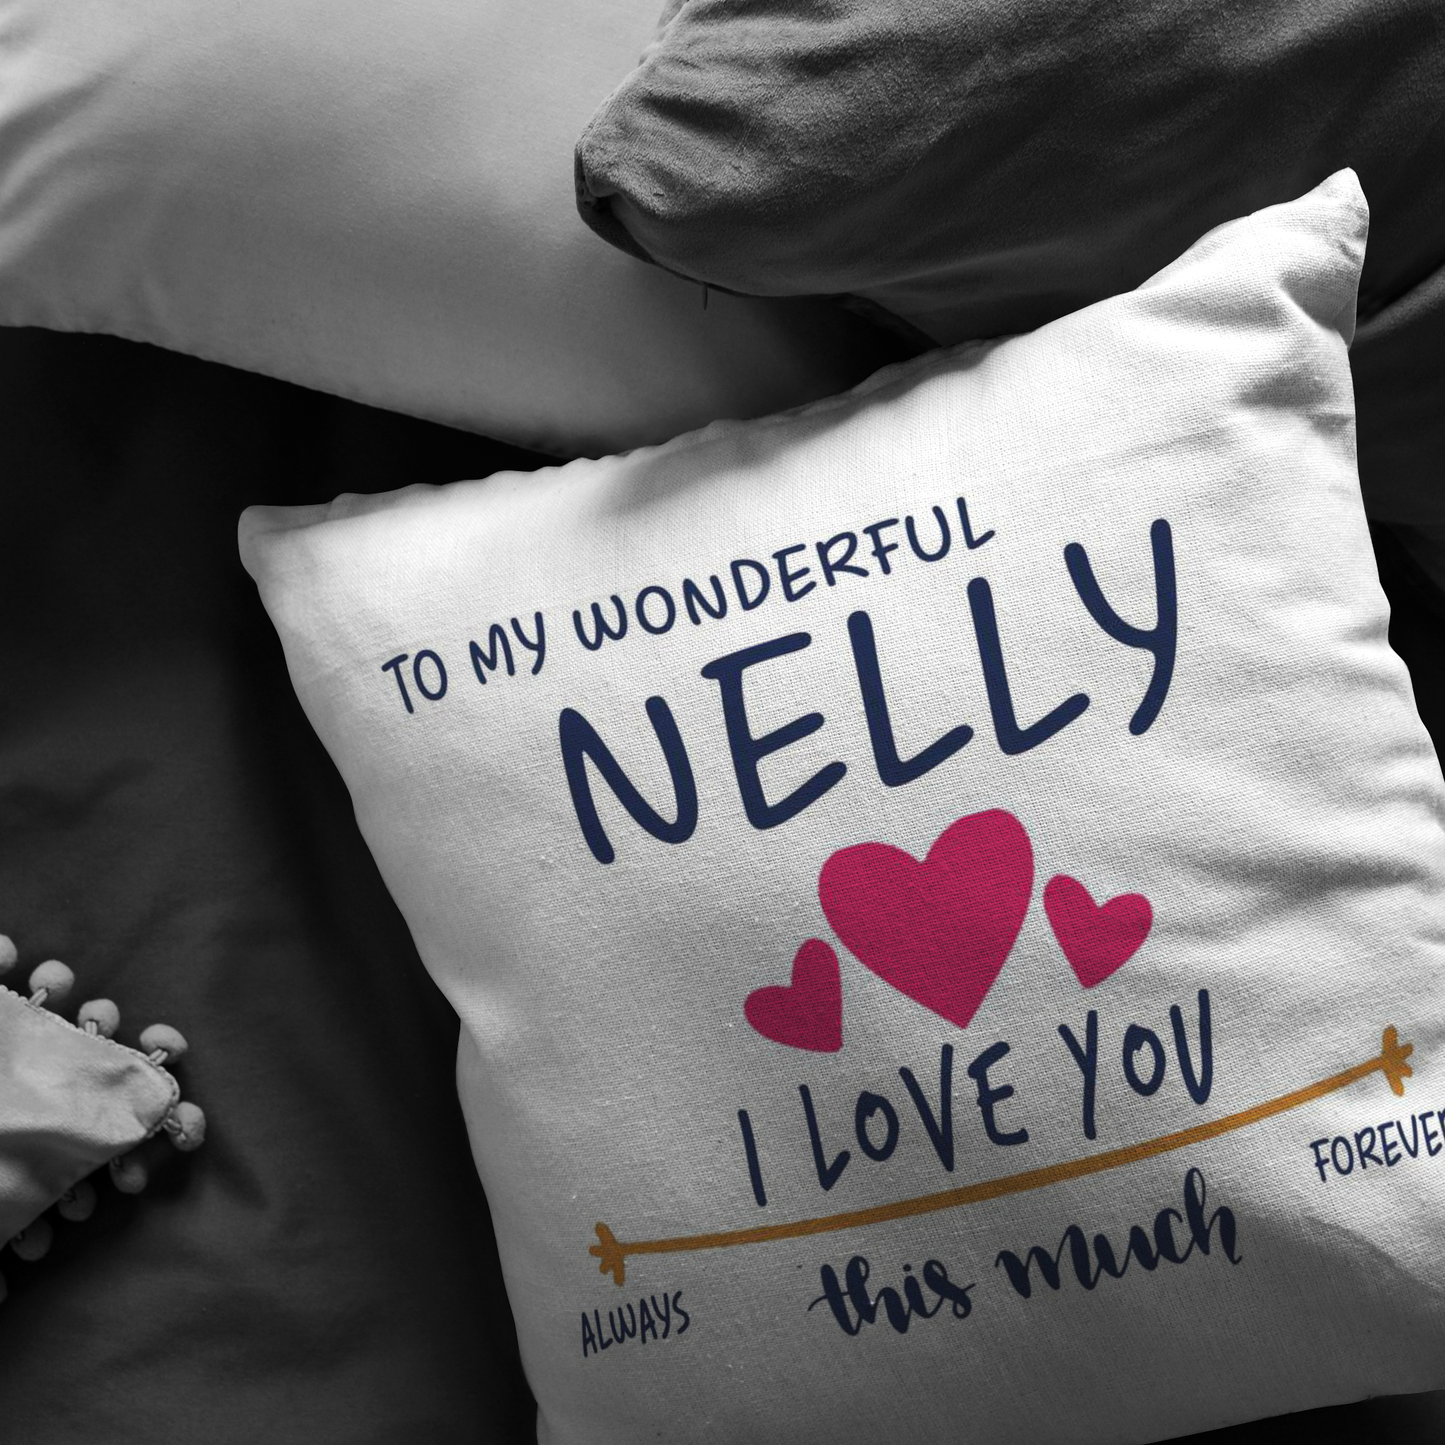 PL-21252056-sp-44639 - [ Nelly | 1 | 1 ] (PI_ThrowPillowCovers) Valentines Day Pillow Covers 18x18 - to My Wonderful Nelly I